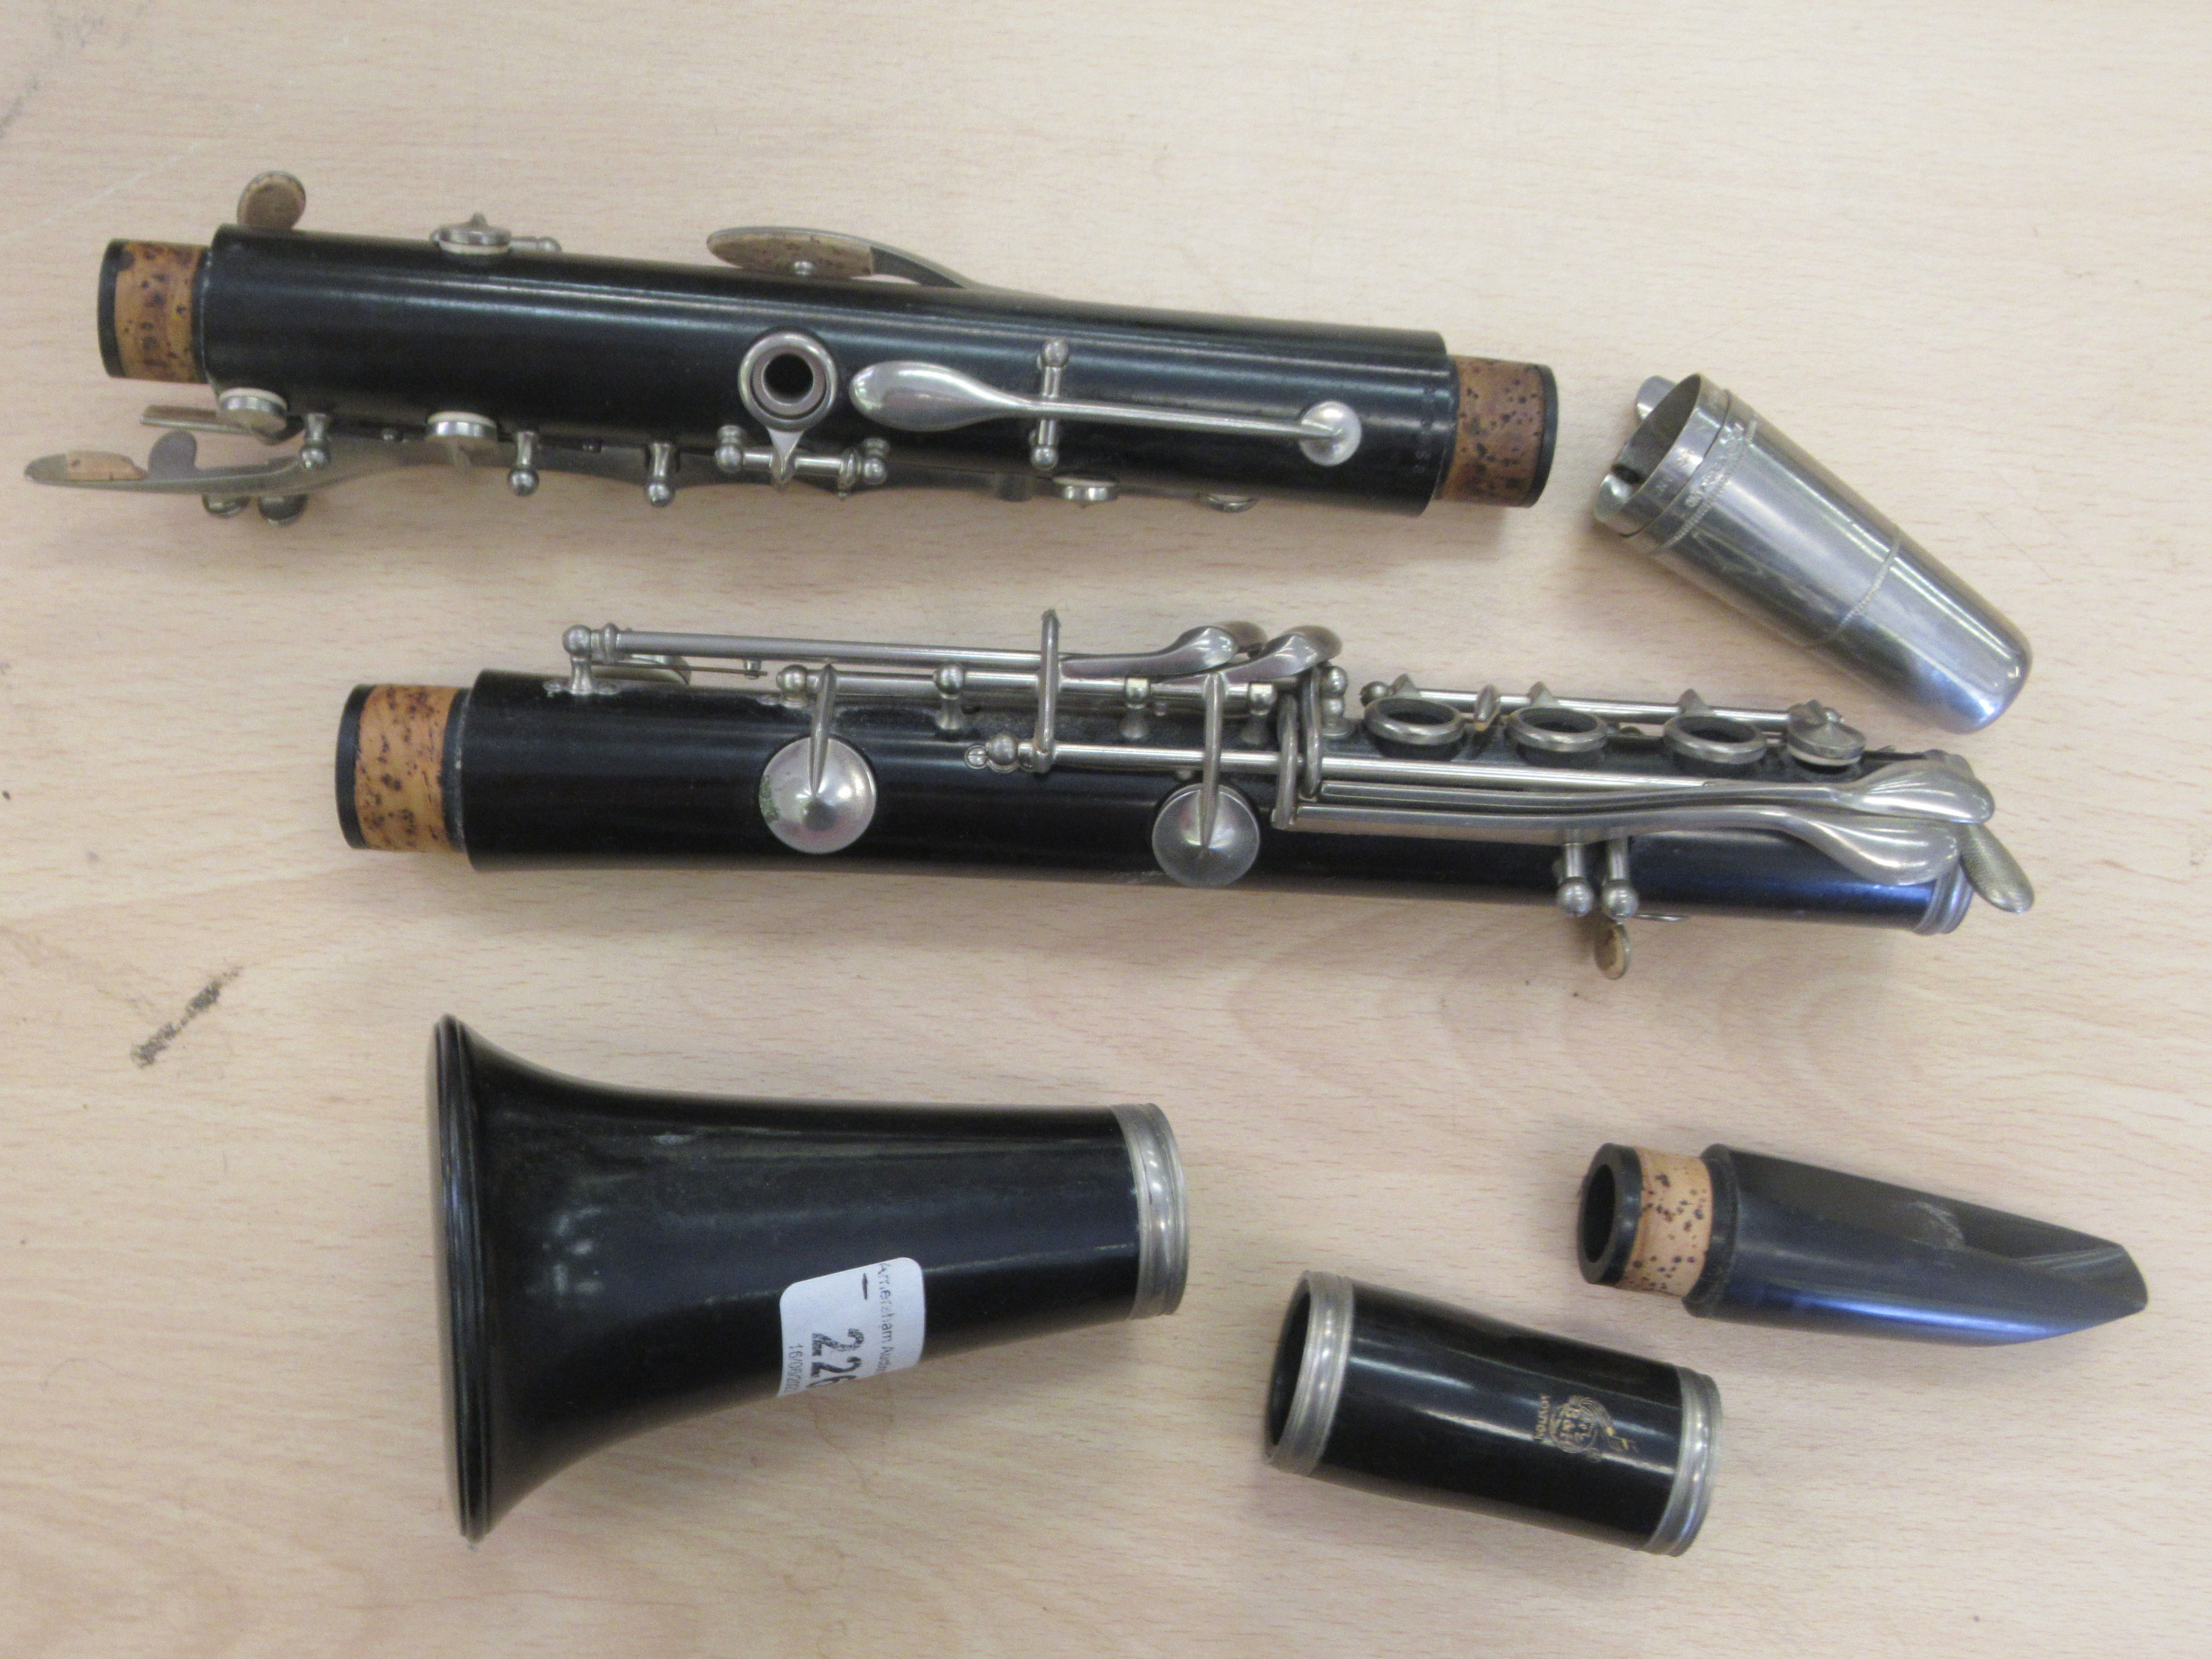 A Boosey & Hawkes clarinet, serial number 269858